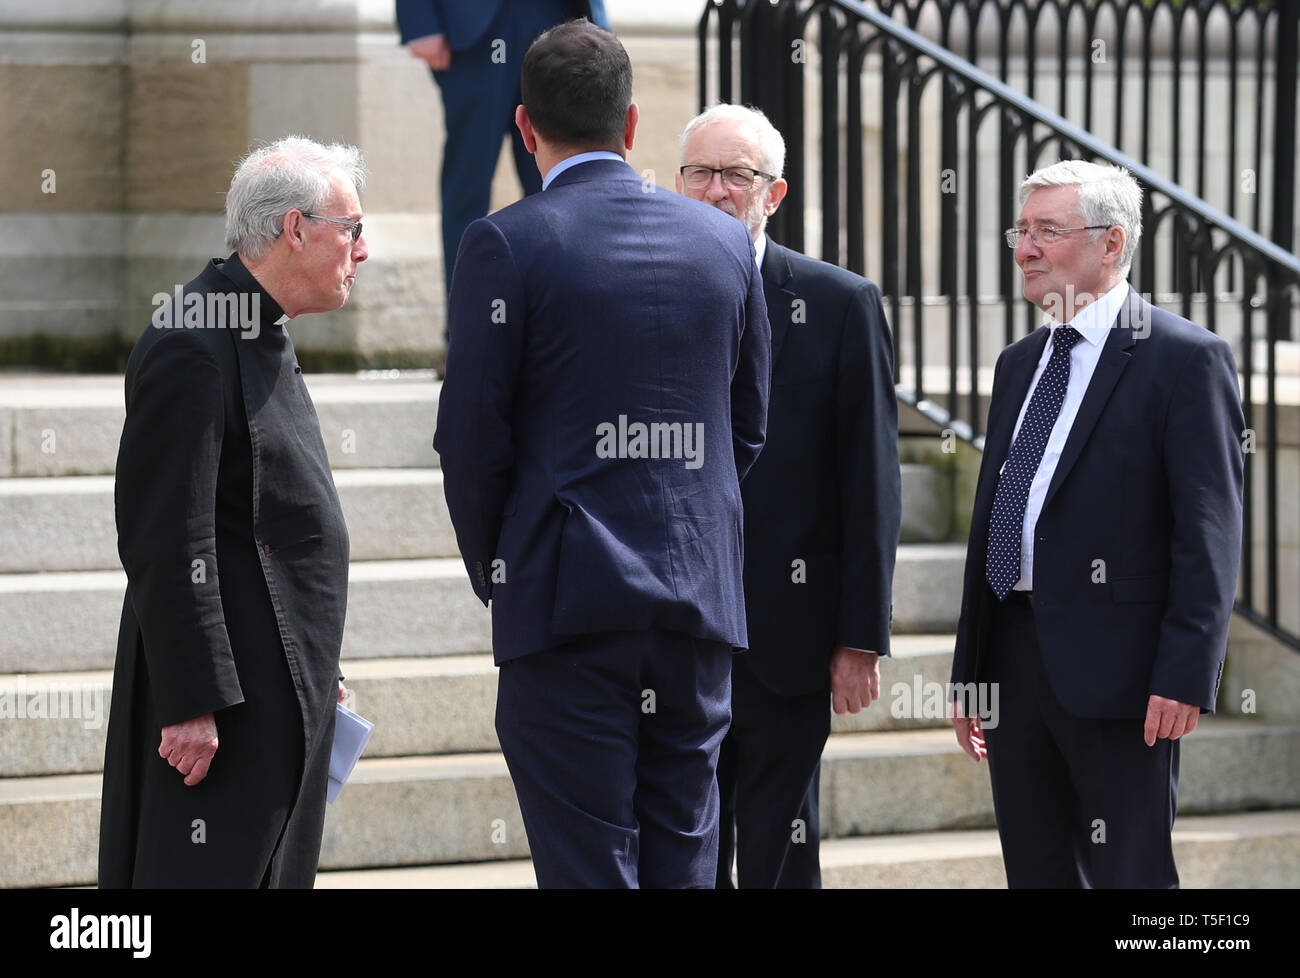 Taoiseach Leo Varadkar (second left), Labour leader Jeremy Corbyn (second right) and shadow Secretary of State for Northern Ireland, Tom Lloyd (right) arrive for the funeral service of murdered journalist Lyra McKee at St Anne's Cathedral in Belfast. Stock Photo